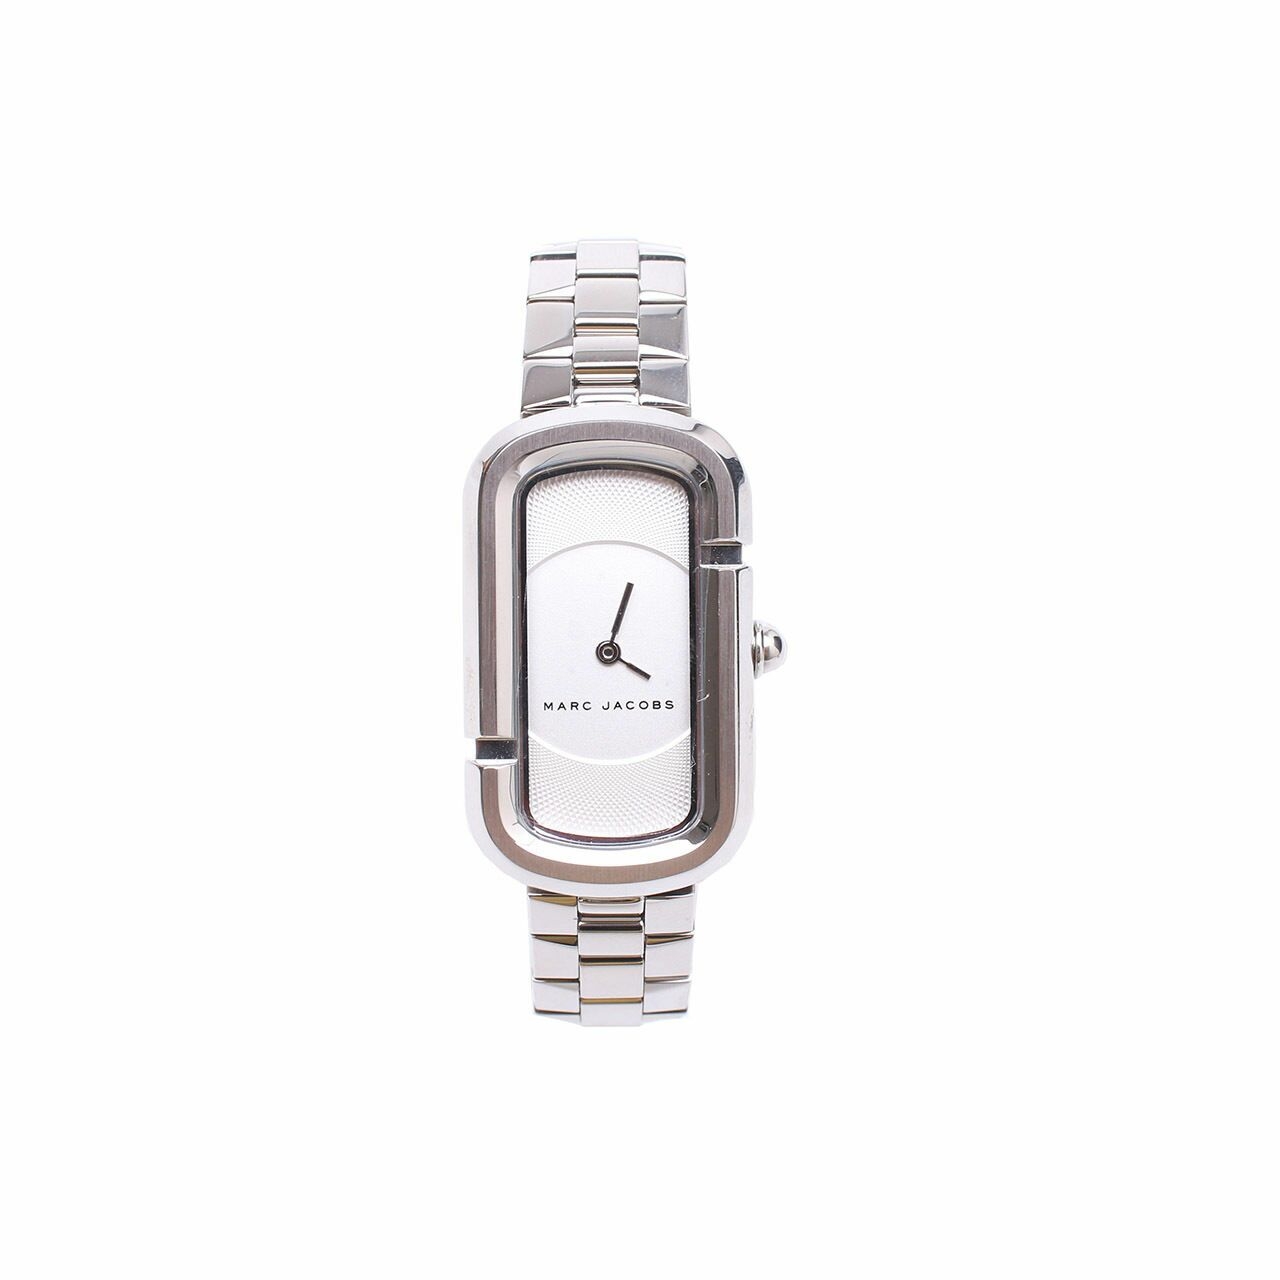 Marc Jacobs White Dial Ladies Watch